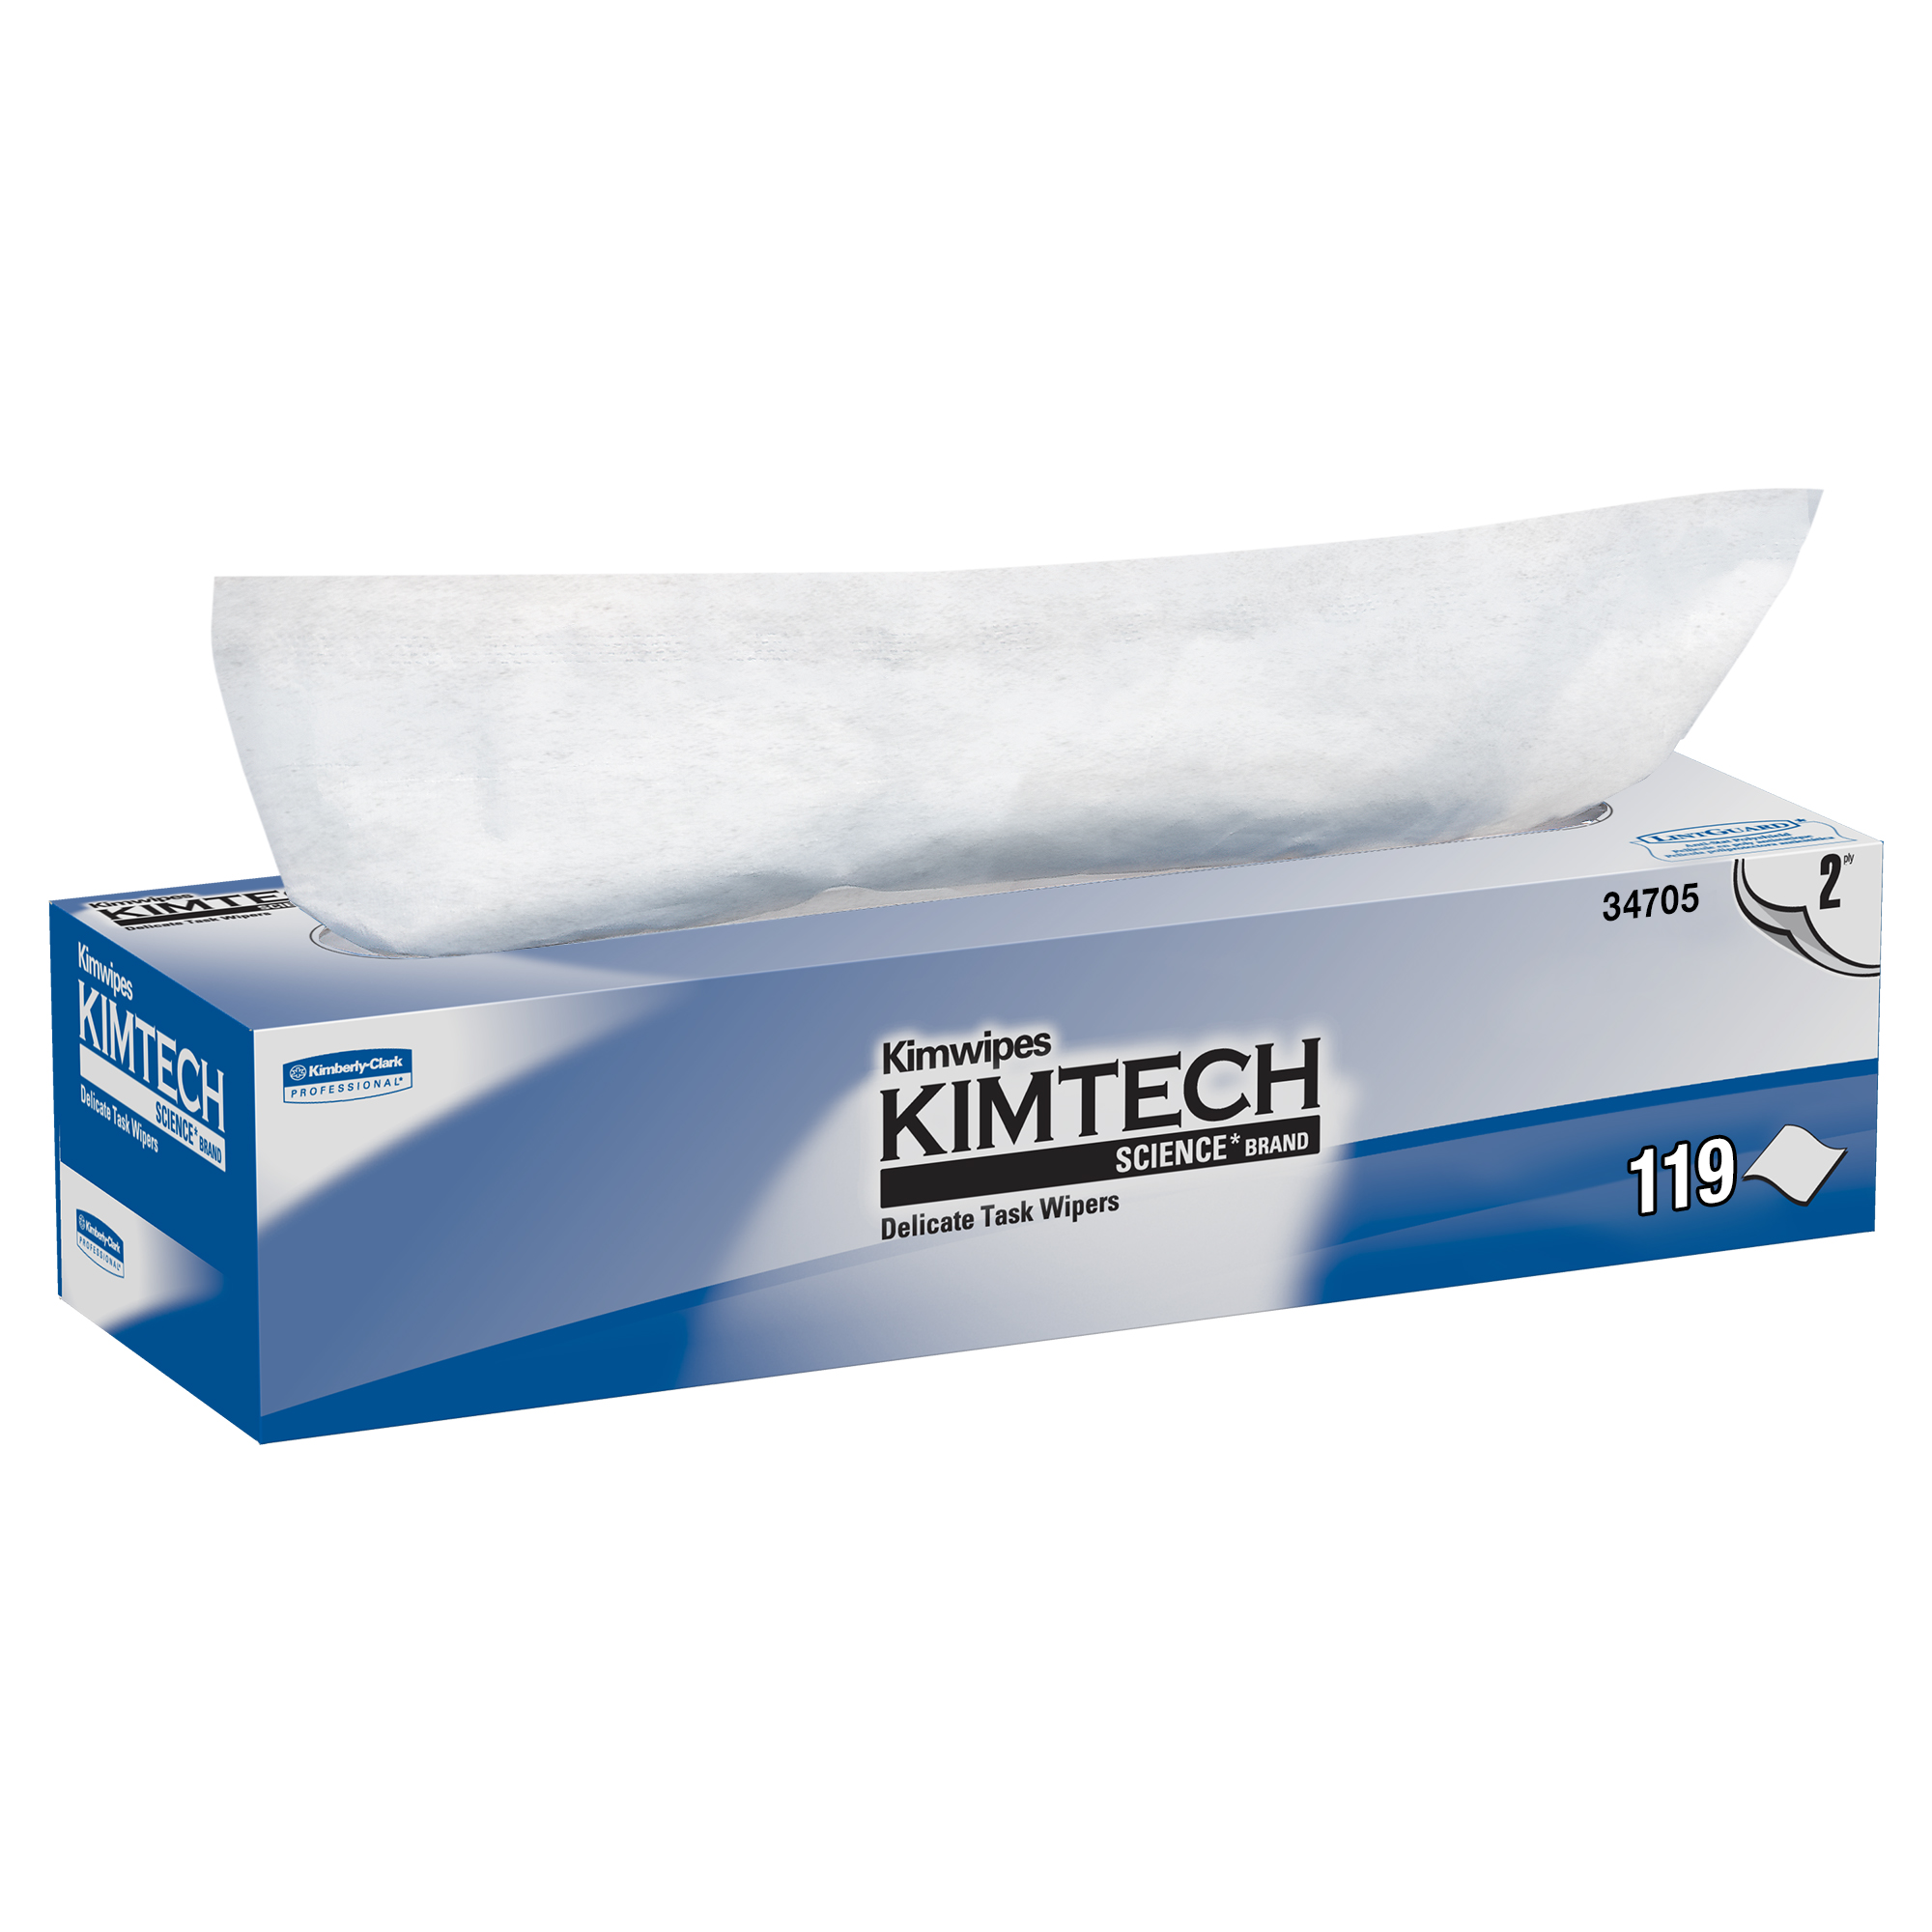 Picture of KIMWIPES Delicate Task Wipers, 2-Ply, 11 4/5 x 11 4/5, 119/Box, 15 Boxes/Carton